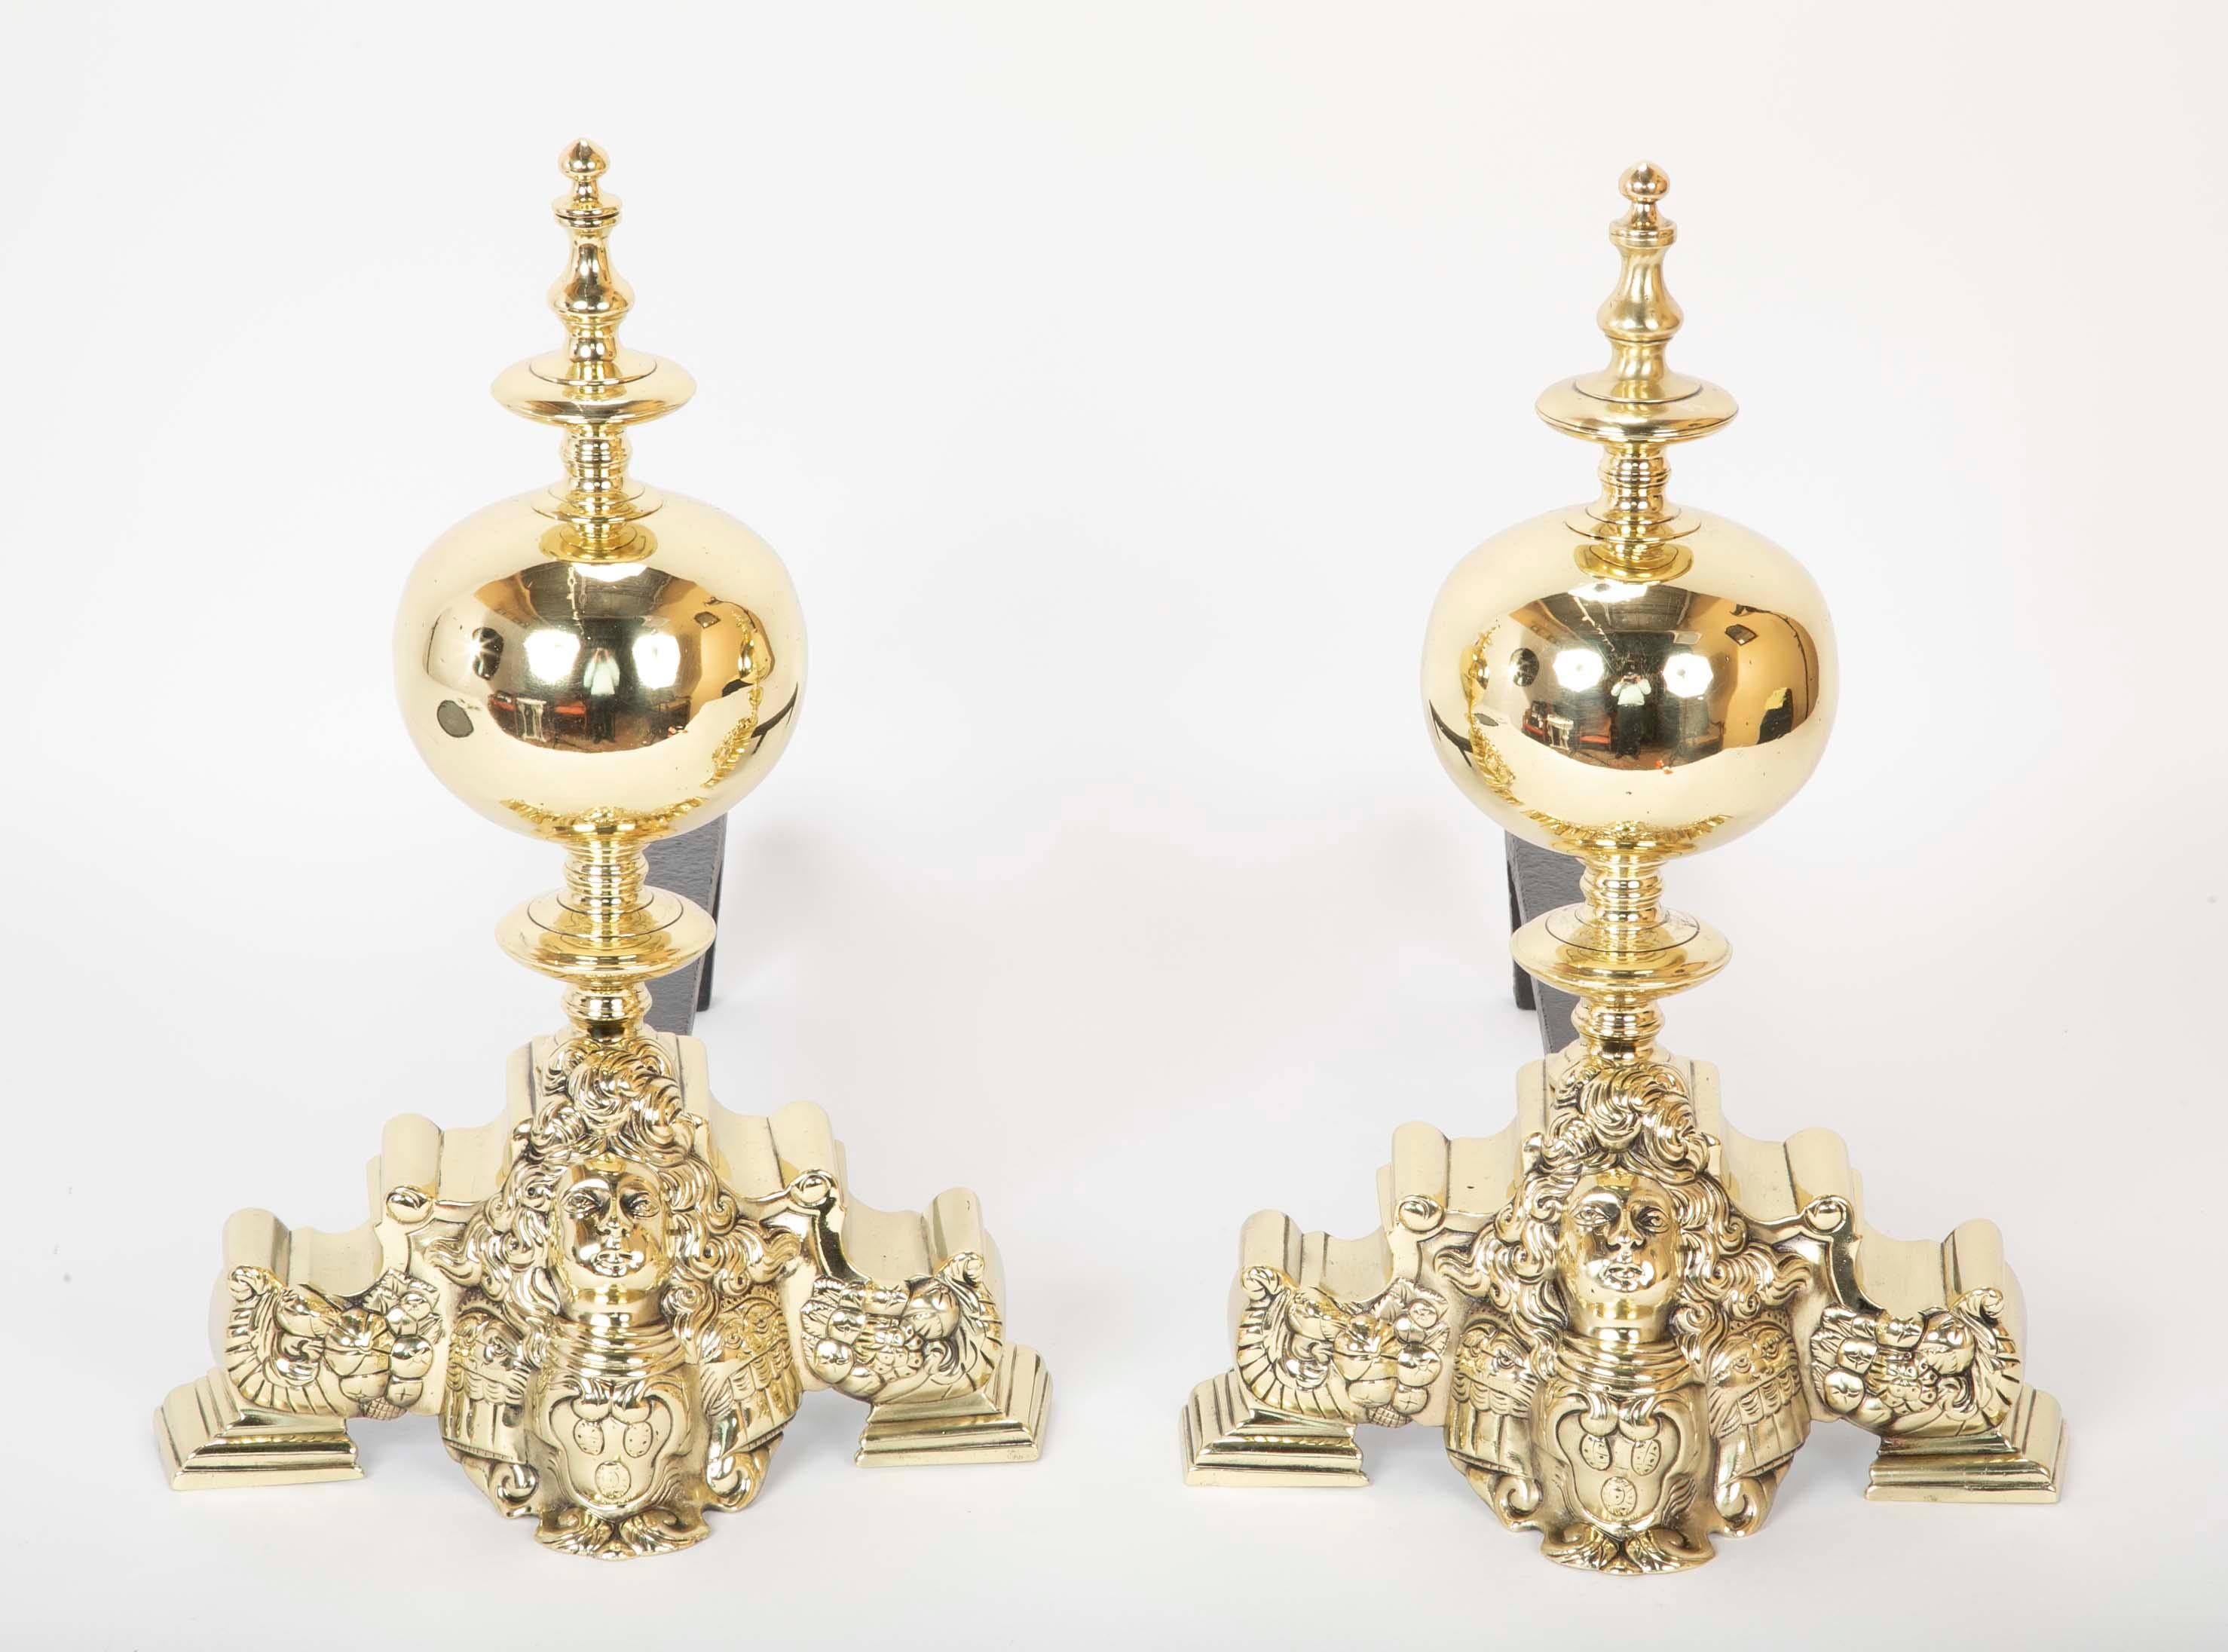 A handsome pair of small scale French Rococo style bronze chenets, the base depicting a male face with flowing hair, perhaps a portrait of Louis XV, above an armorial, flanked by lion masks and cornucopia. Topped by a large ball and bold turnings.